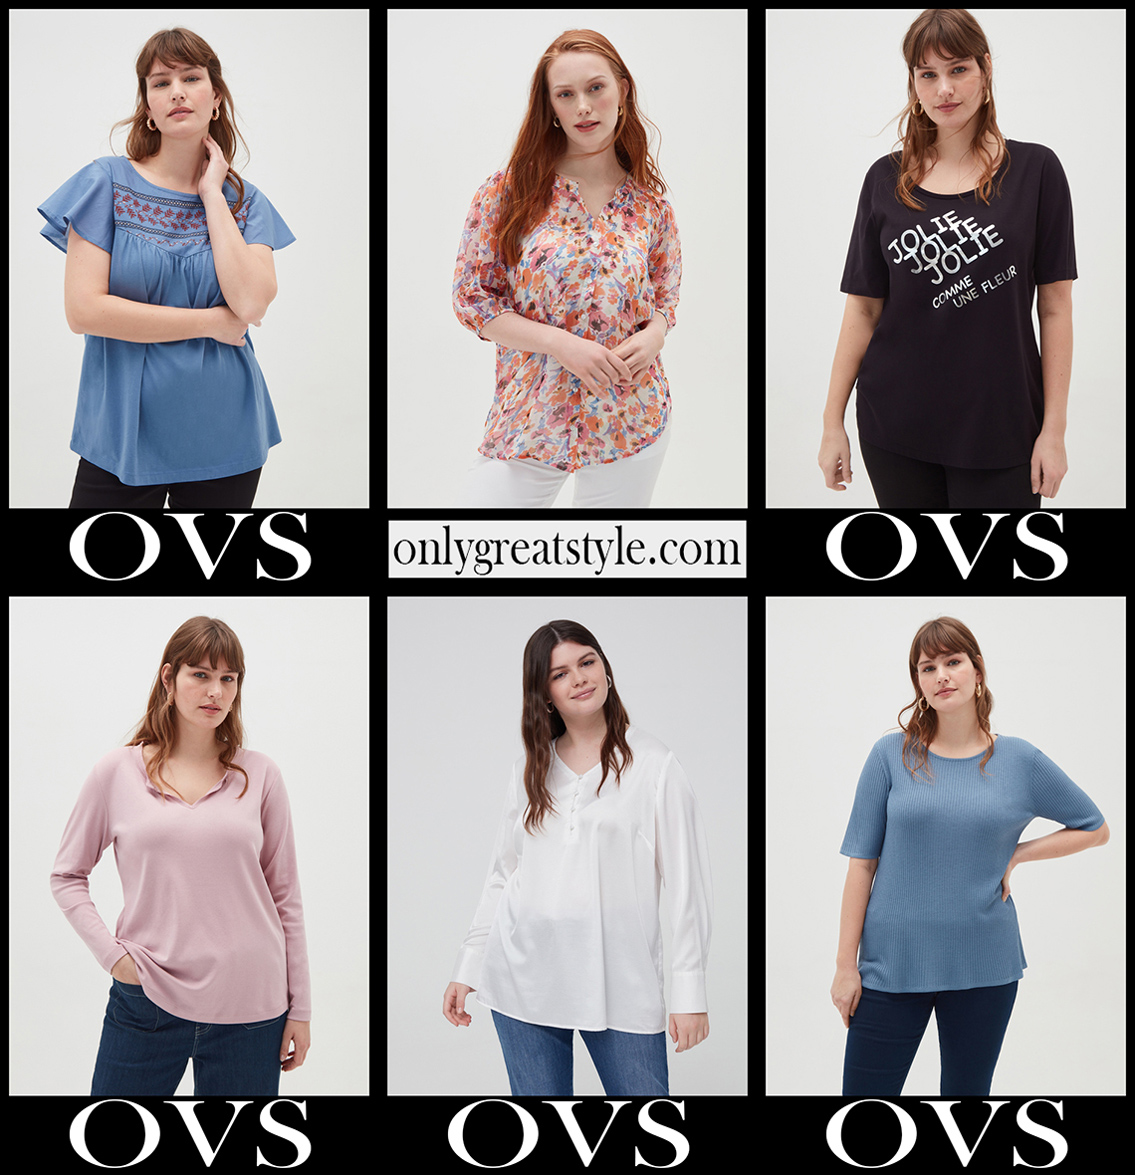 Curvy OVS 2021 new arrivals womens clothing plus size